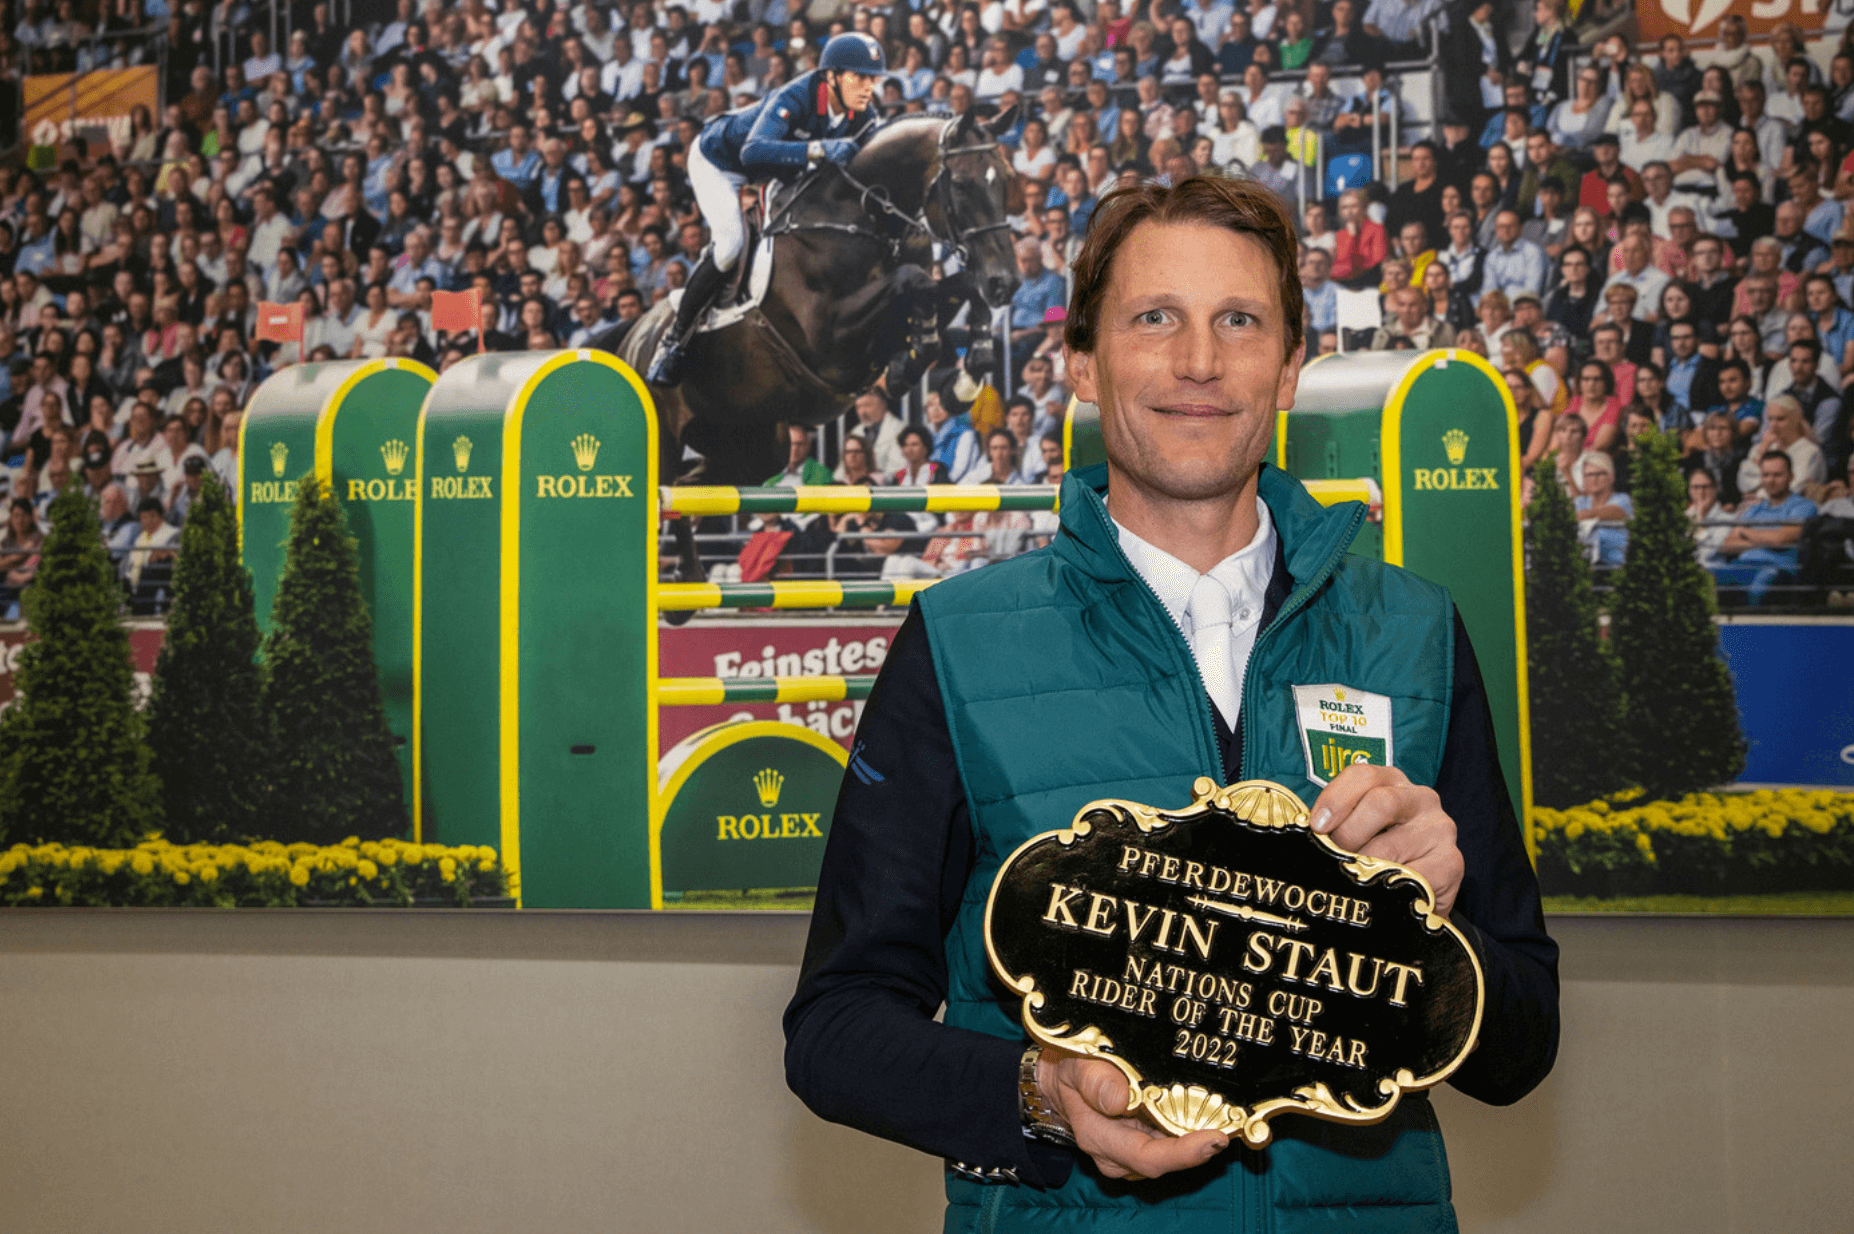 Kevin Staut is best of the best in Nations Cup of 2022